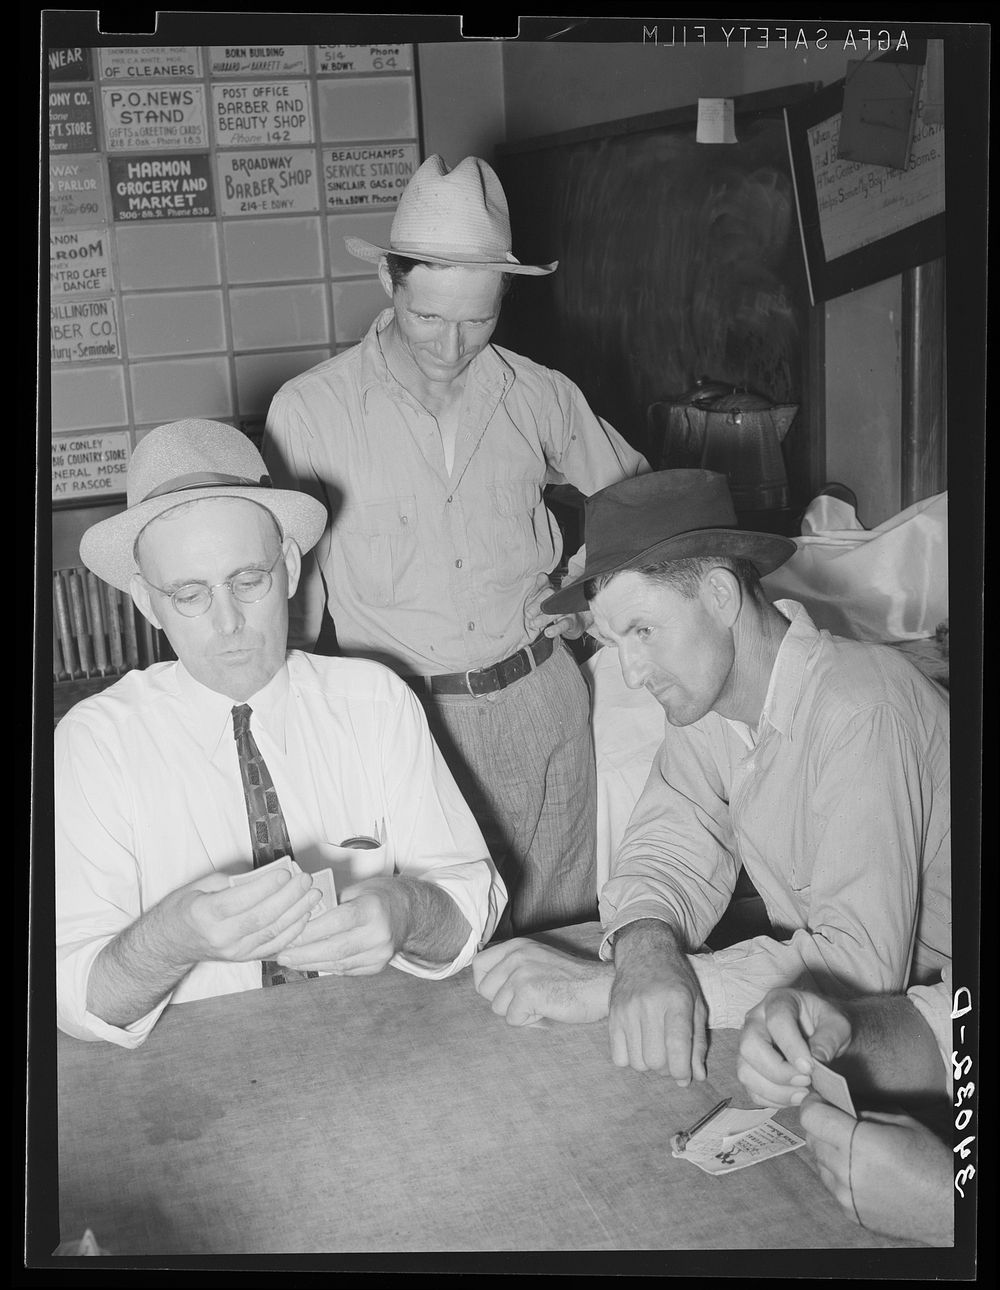 Game of cards at oil workers' union headquarters. Seminole, Oklahoma by Russell Lee